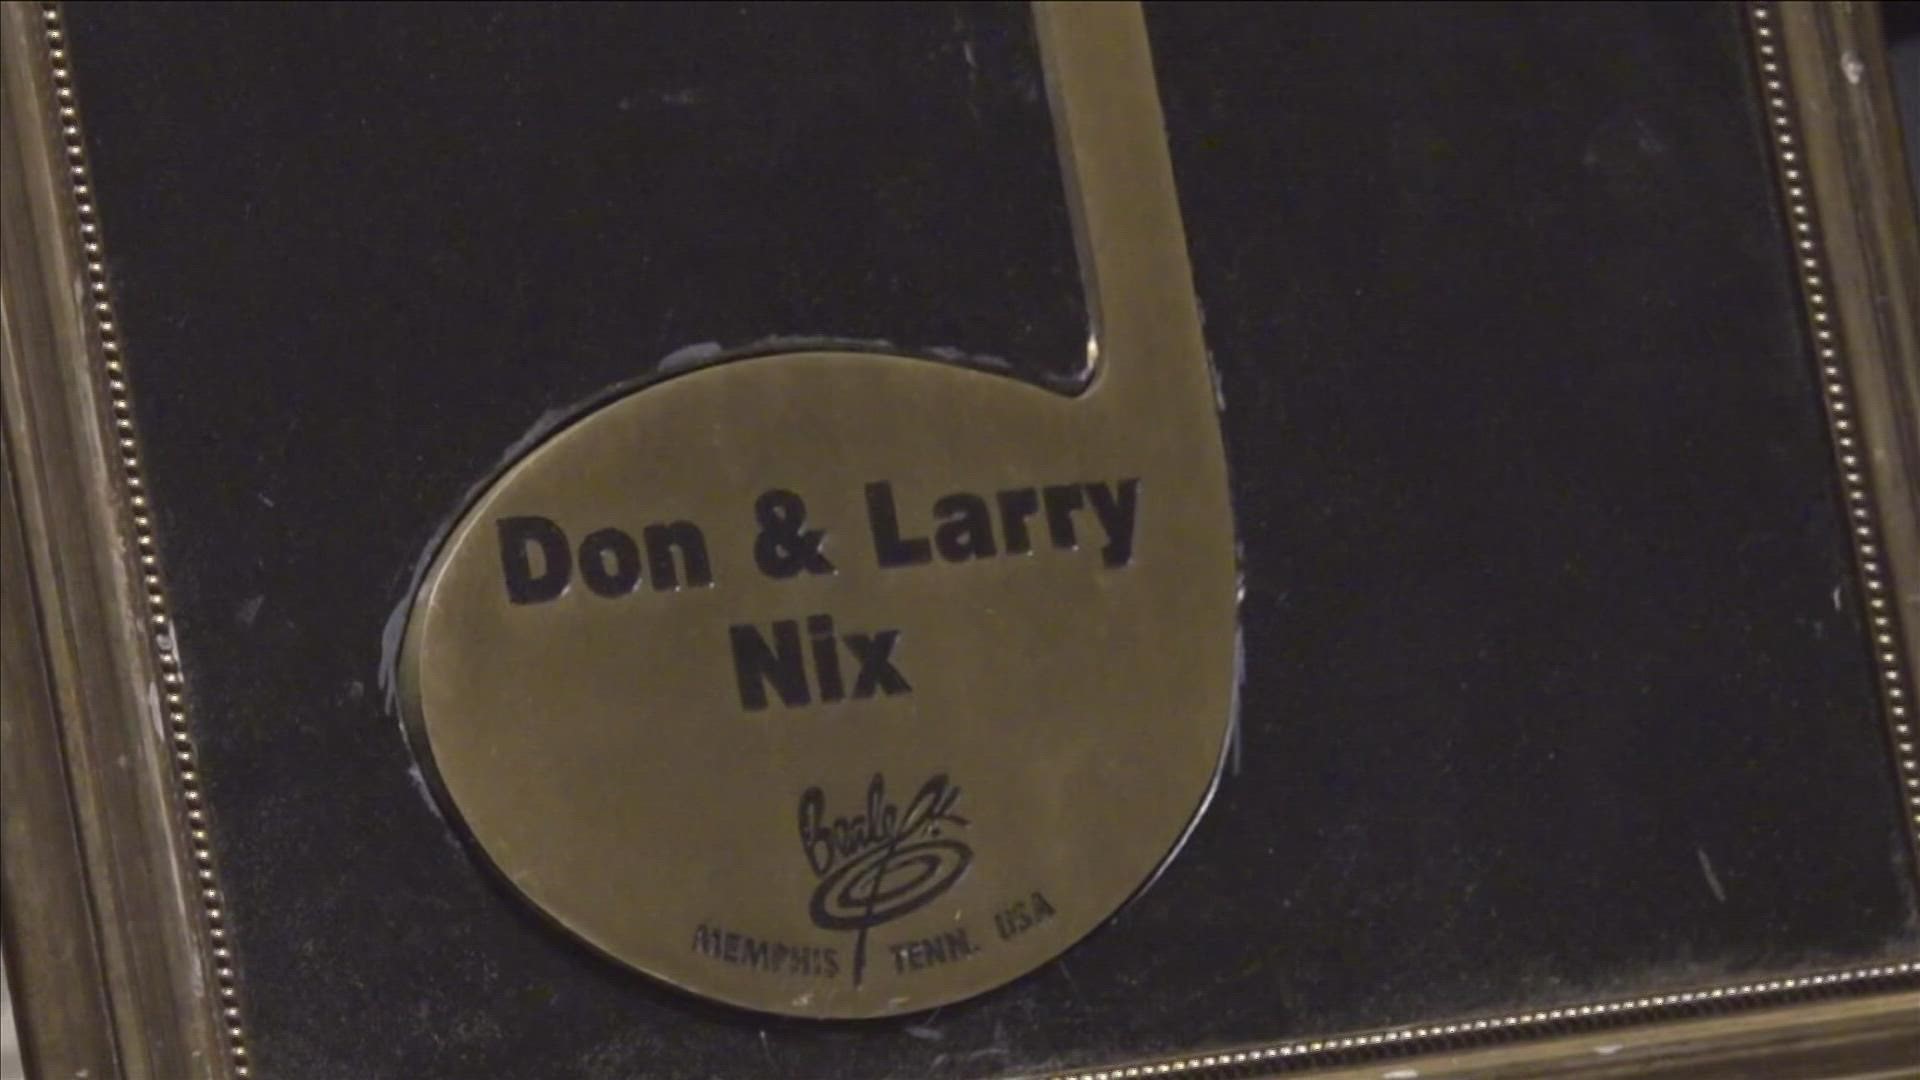 Saxophonist for The Mar-Keys Don Nix and his brother Larry, who ran a mastering studio for STAX and Ardent, have been recognized by the Beale Street Walk of Fame.